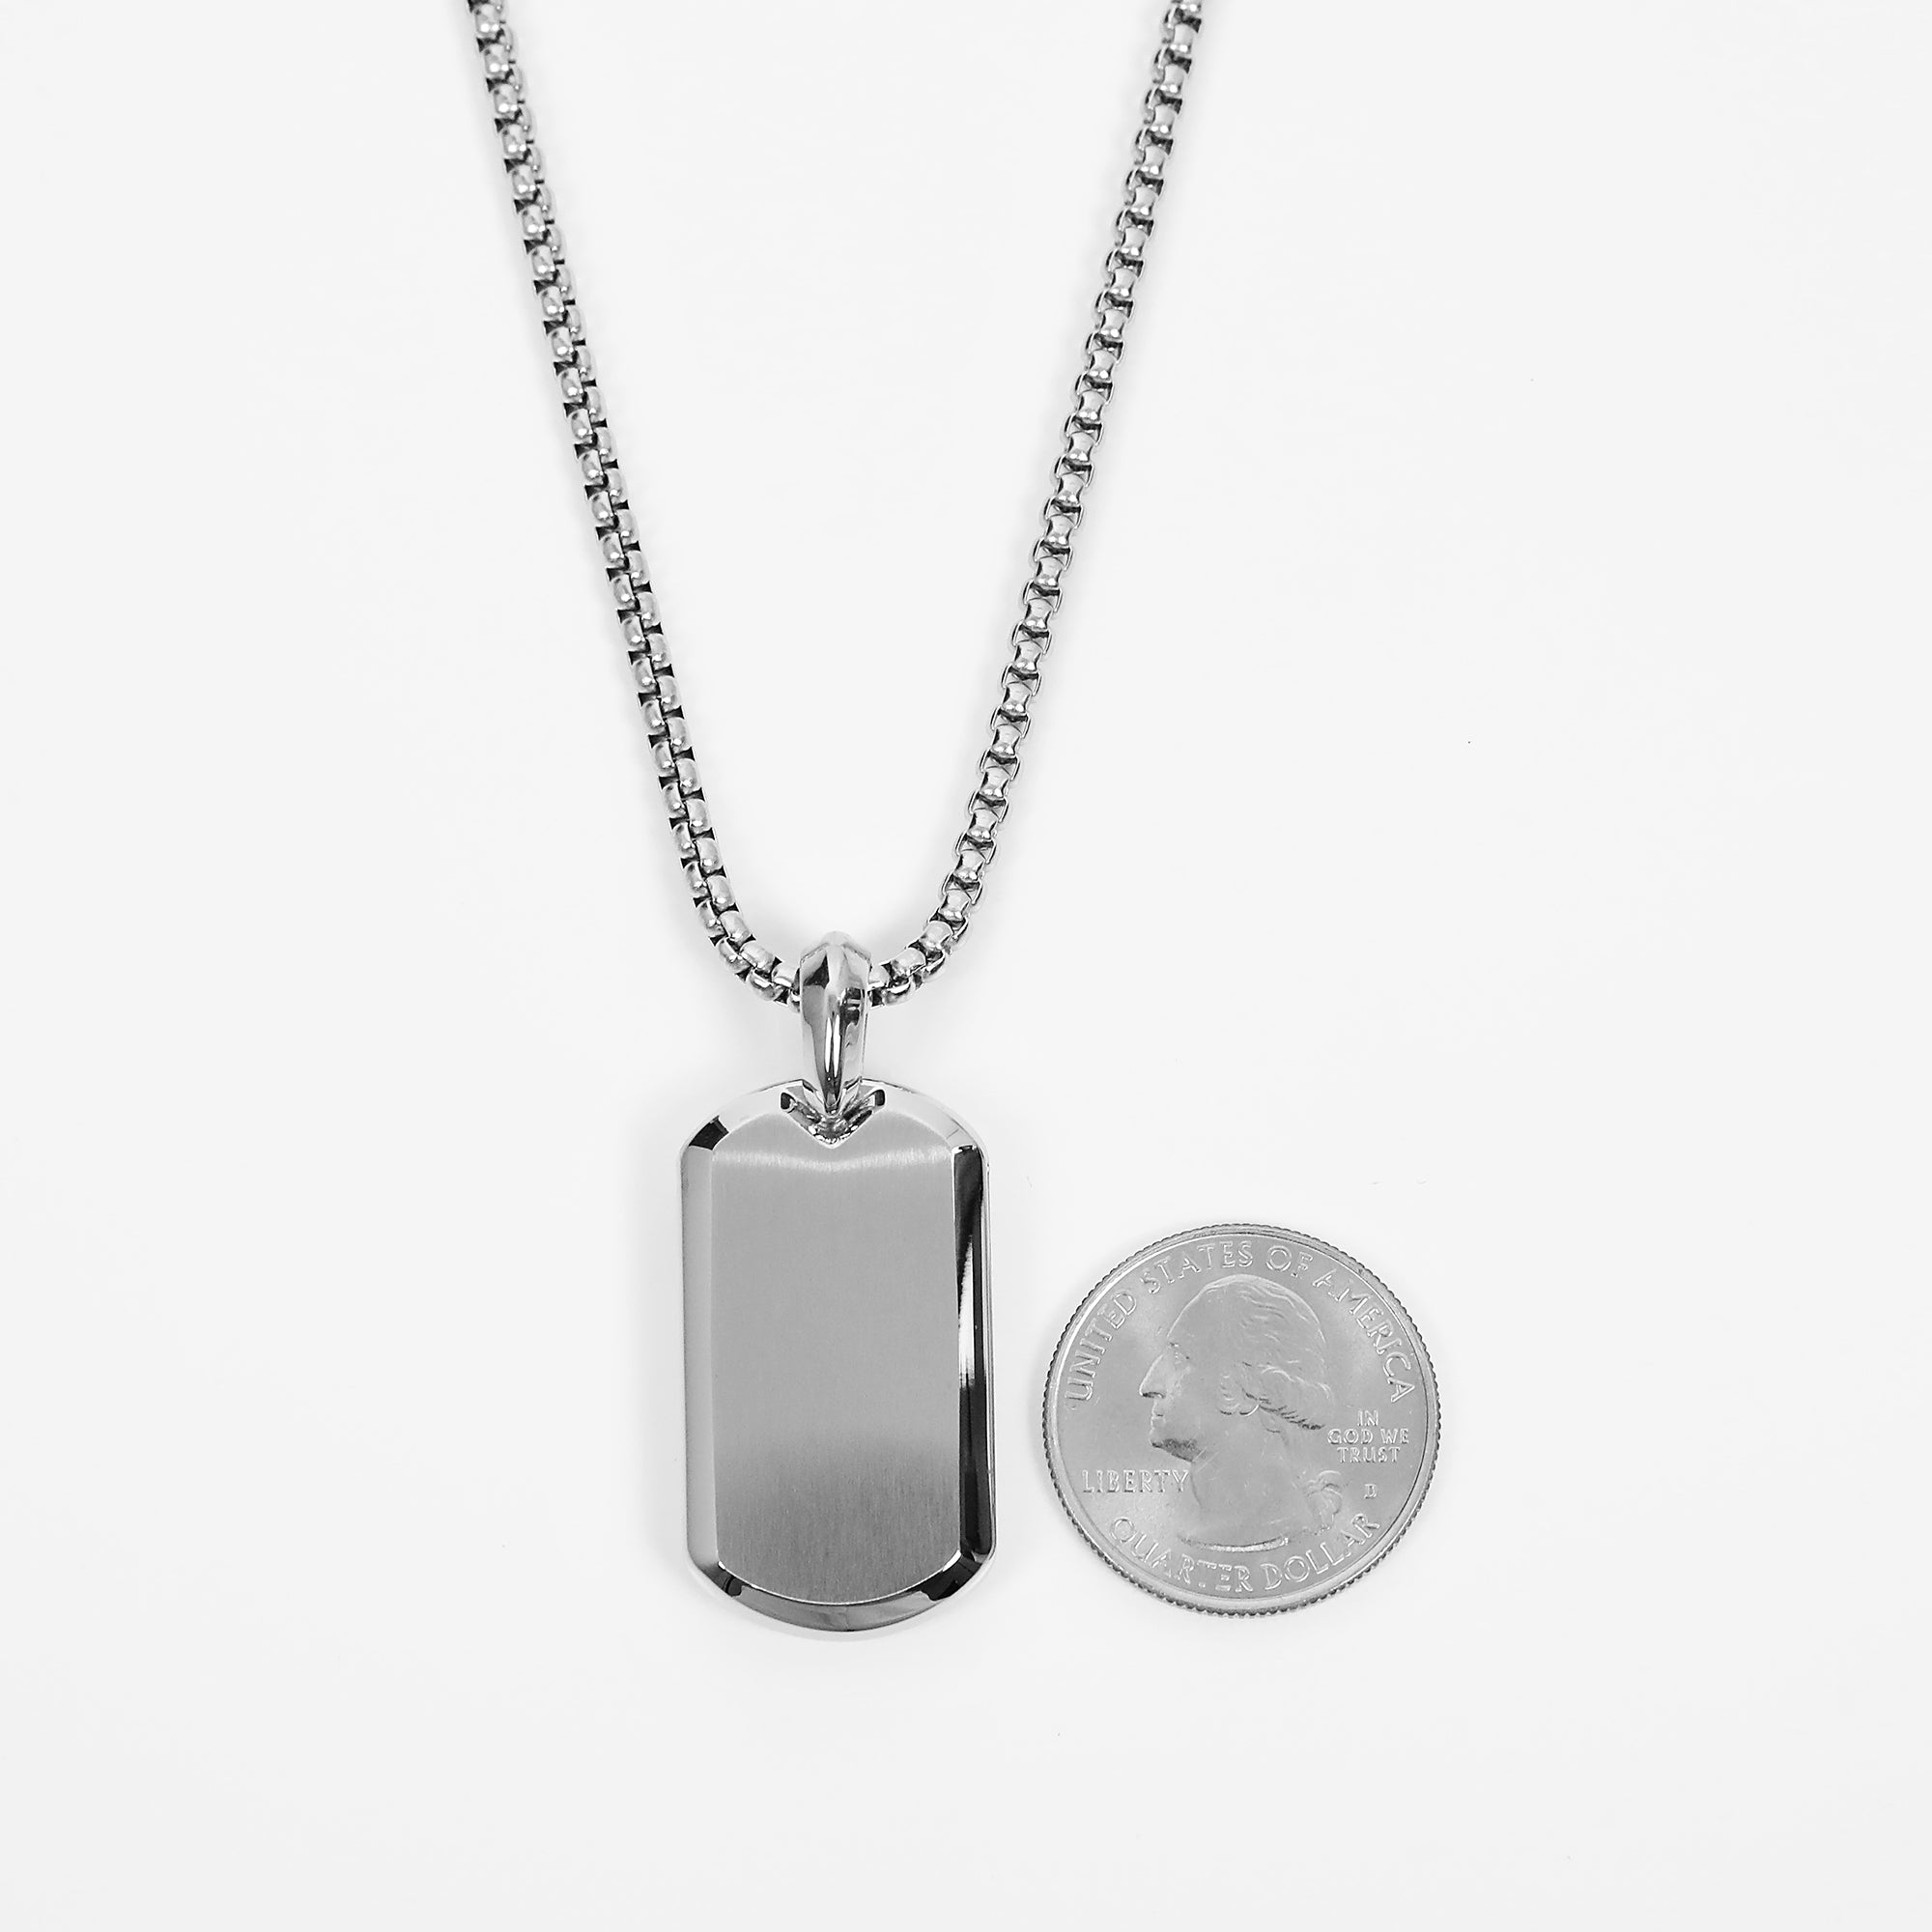 Modern Tag Necklace - Silver